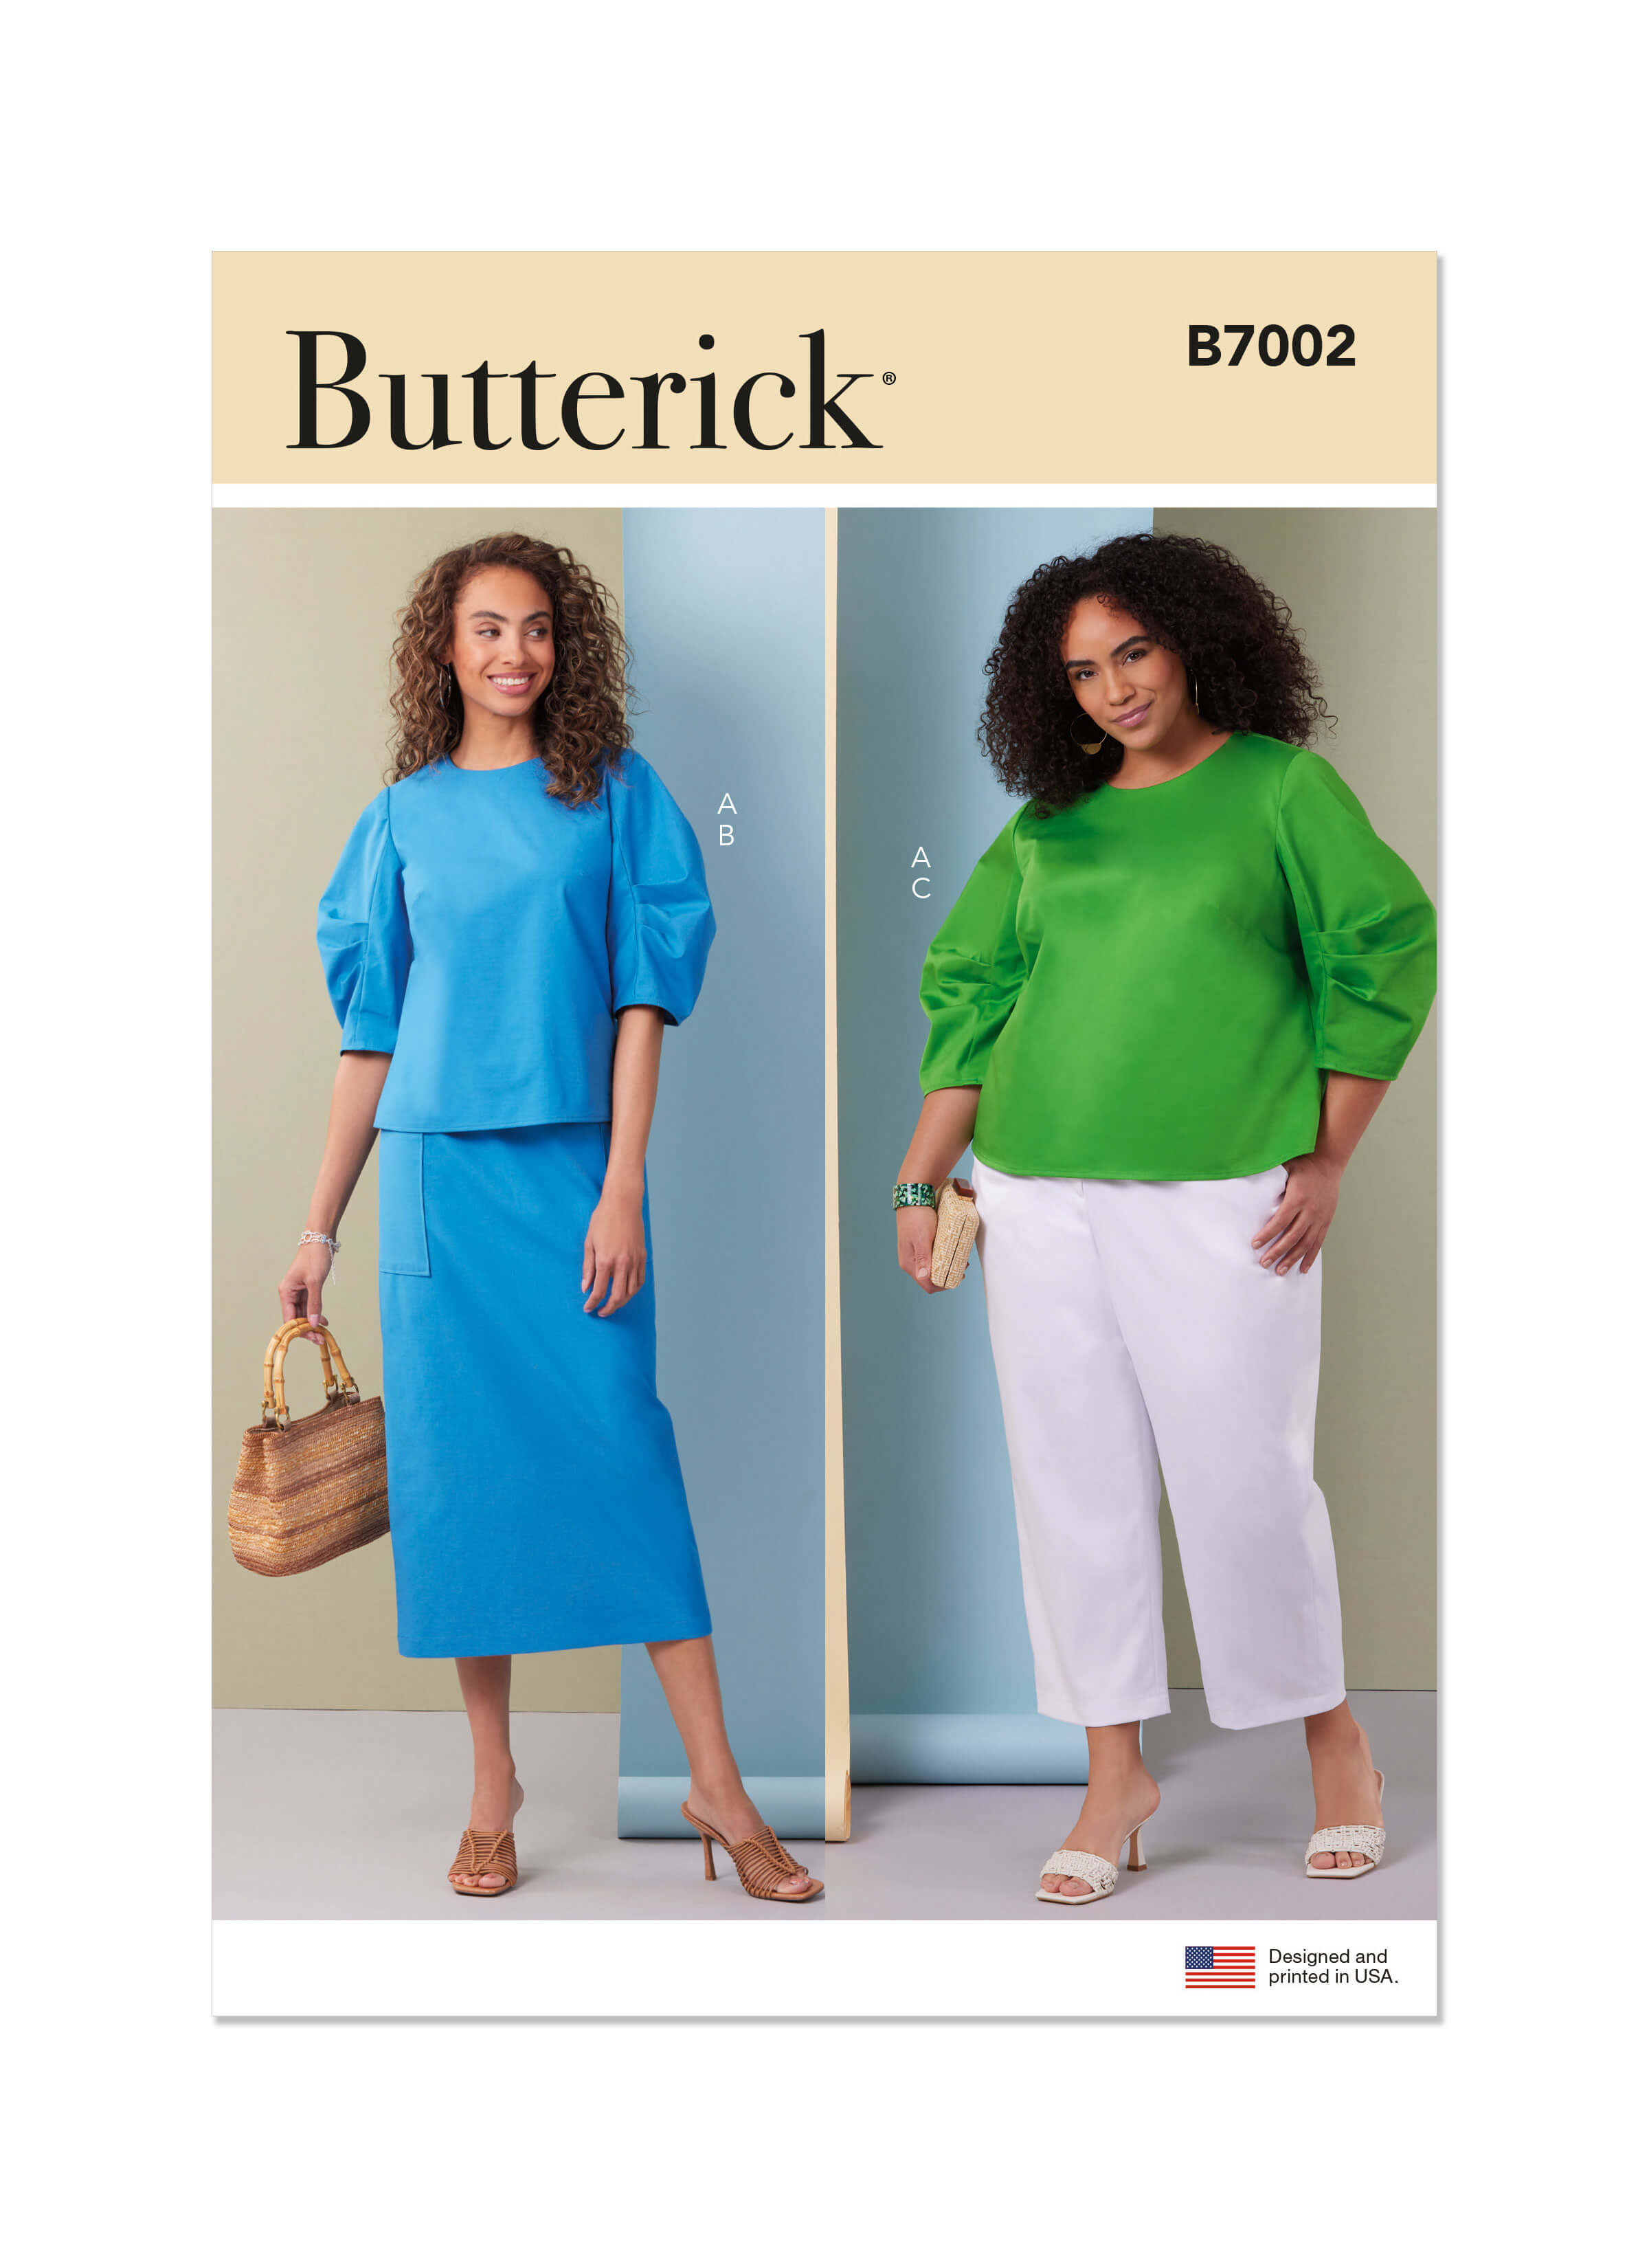 Butterick Sewing Pattern B7002 Misses’ and Women's Top, Skirt and Trousers